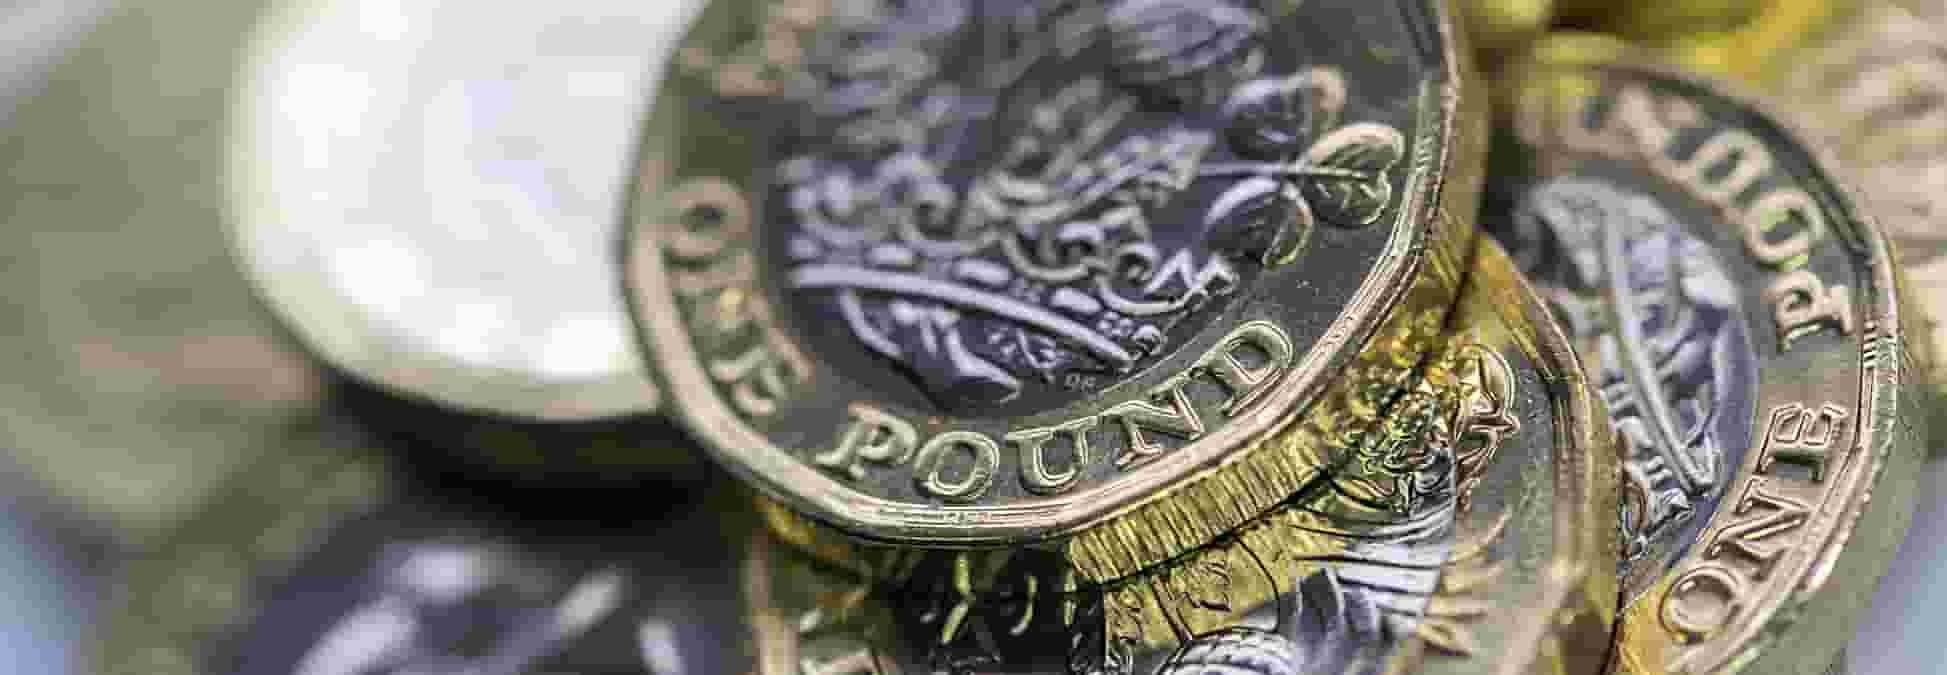 Voluntary Real Living Wage Increases, Offering Lifeline